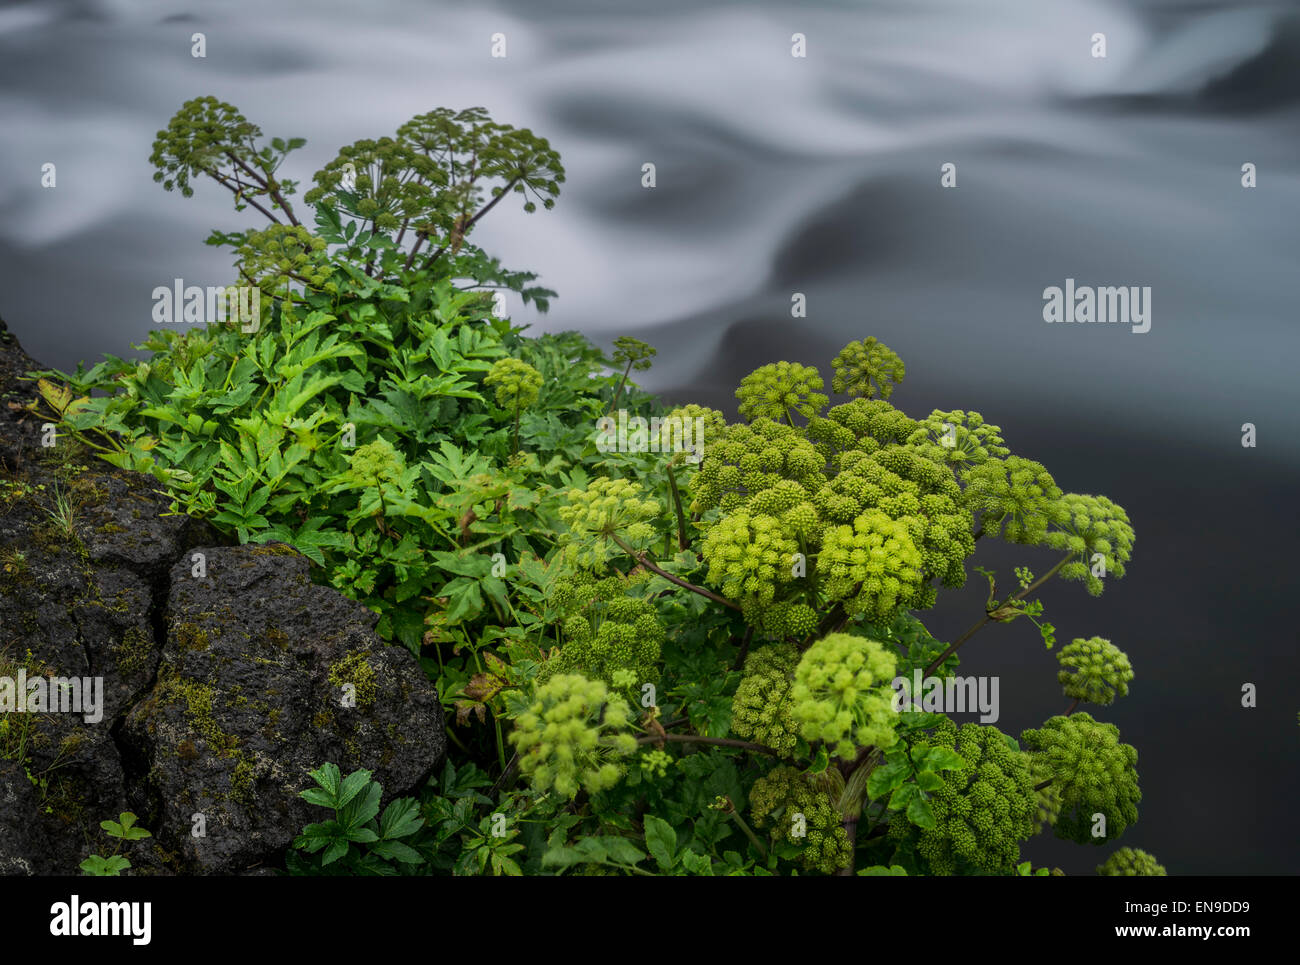 Angelica herb wildflowers. Angelica is used extensively in herbal medicine. Iceland Stock Photo